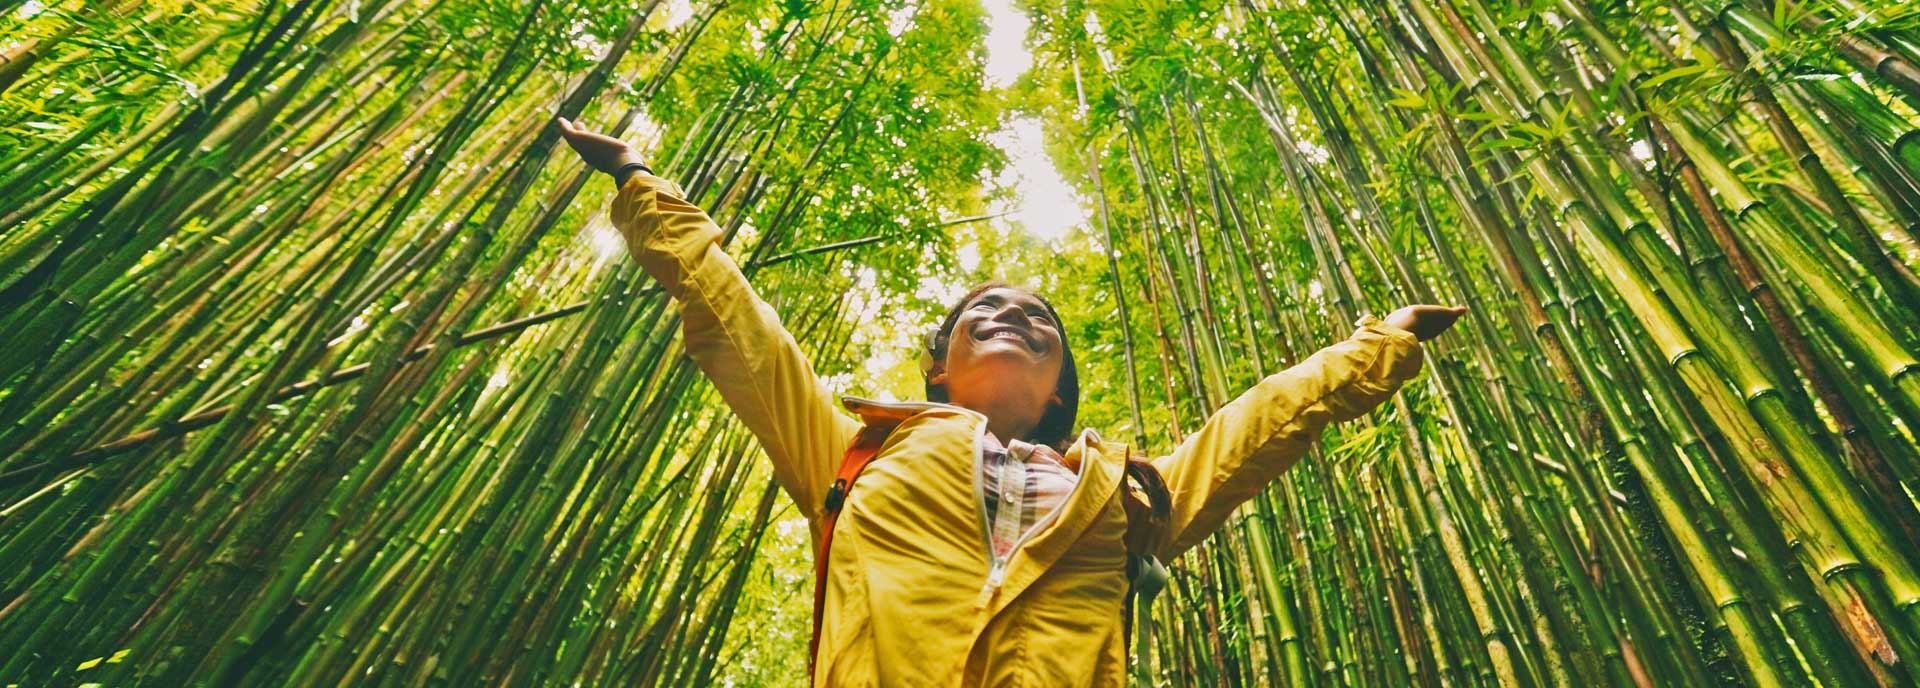 Girl in a field of bamboo smiling with outstretched arms.